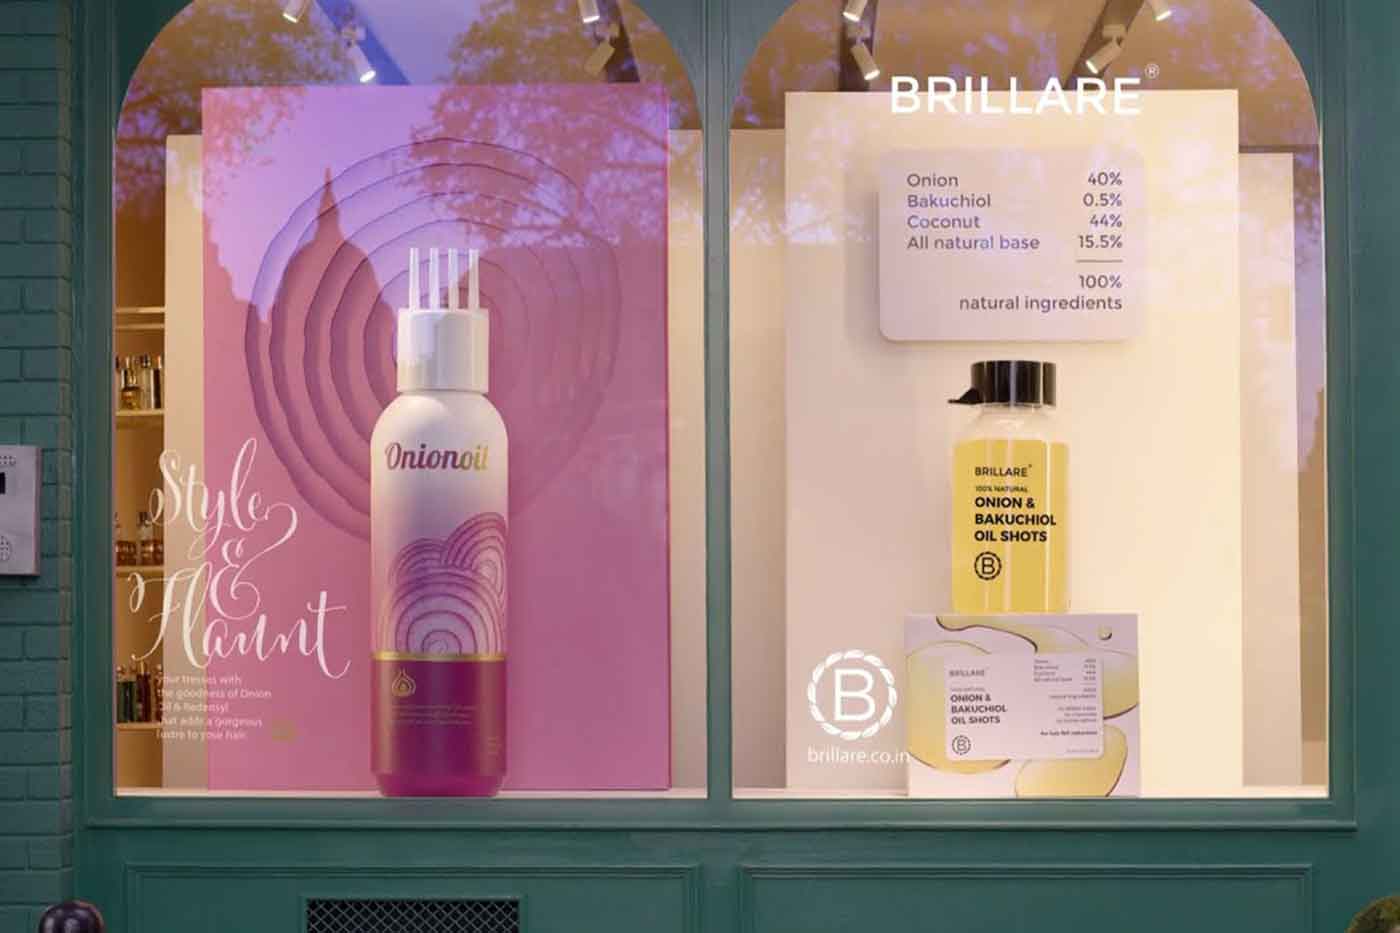 Brillare releases new campaign showcasing complete ingredient transparency